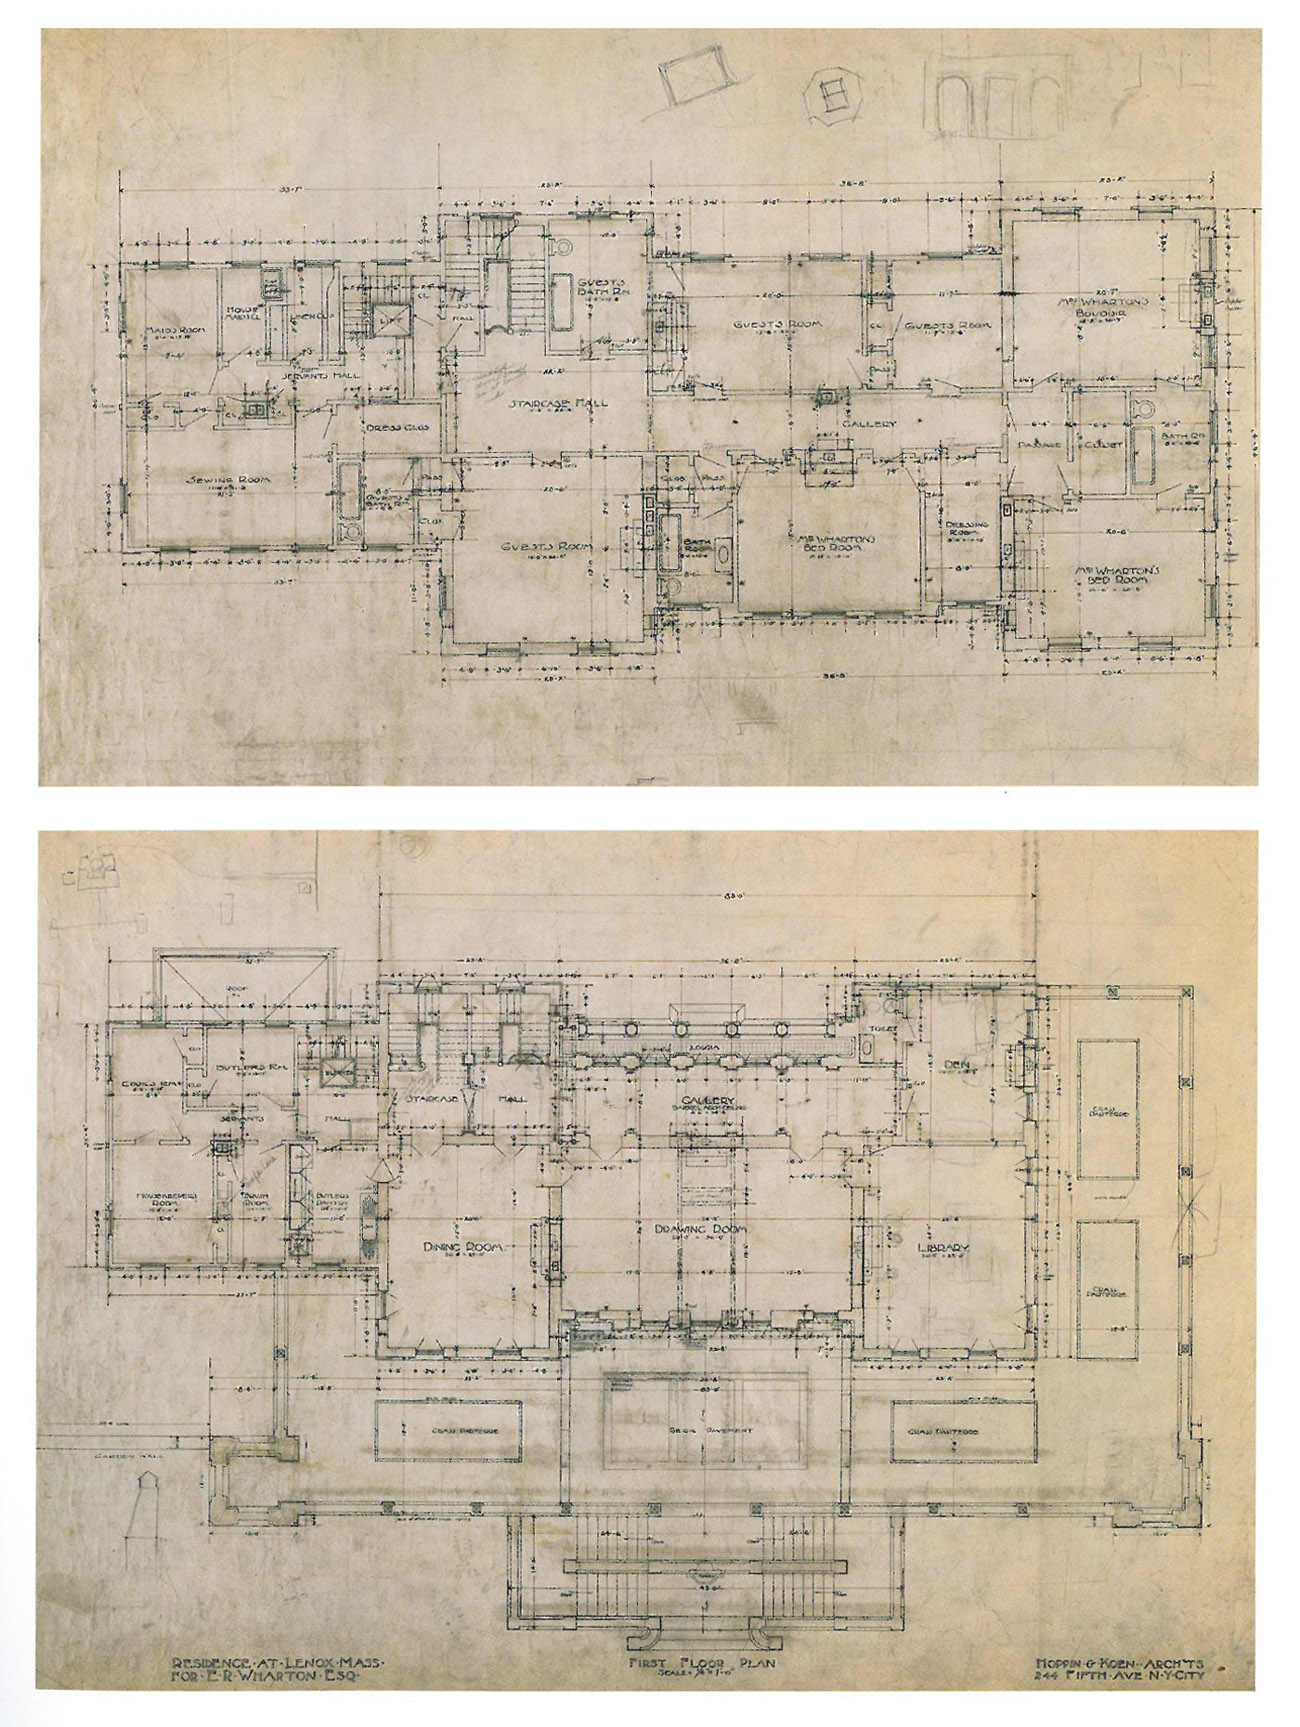 House Plans for the Main Floor, and for the Bedroom Floor of The Mount. Image courtesy of "Edith Wharton at Home: Life at The Mount," by Richard Guy Wilson.